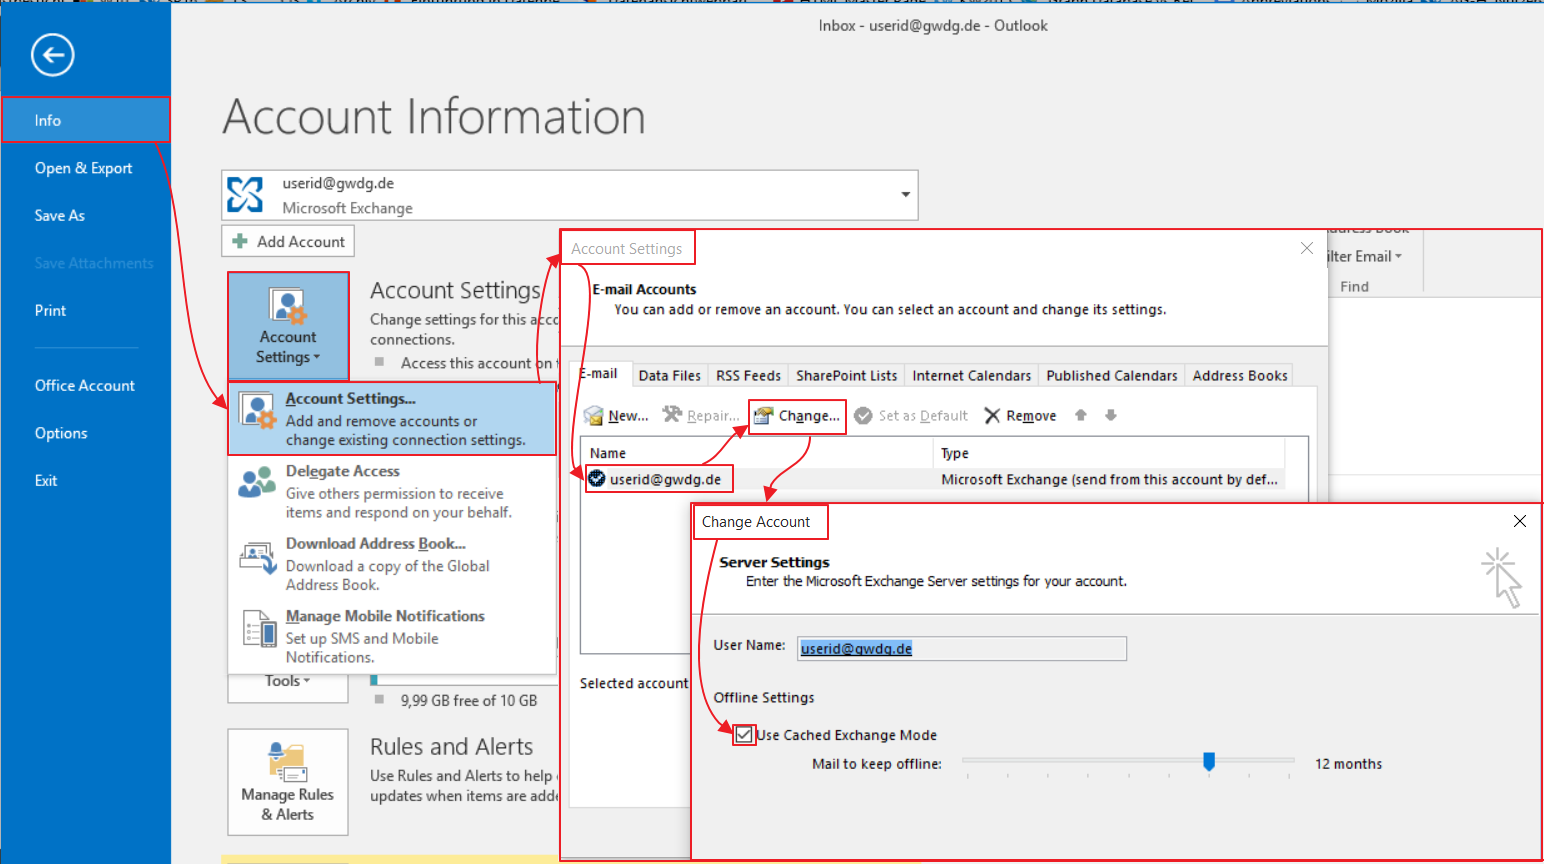 why cached exchange mode outlook 2016